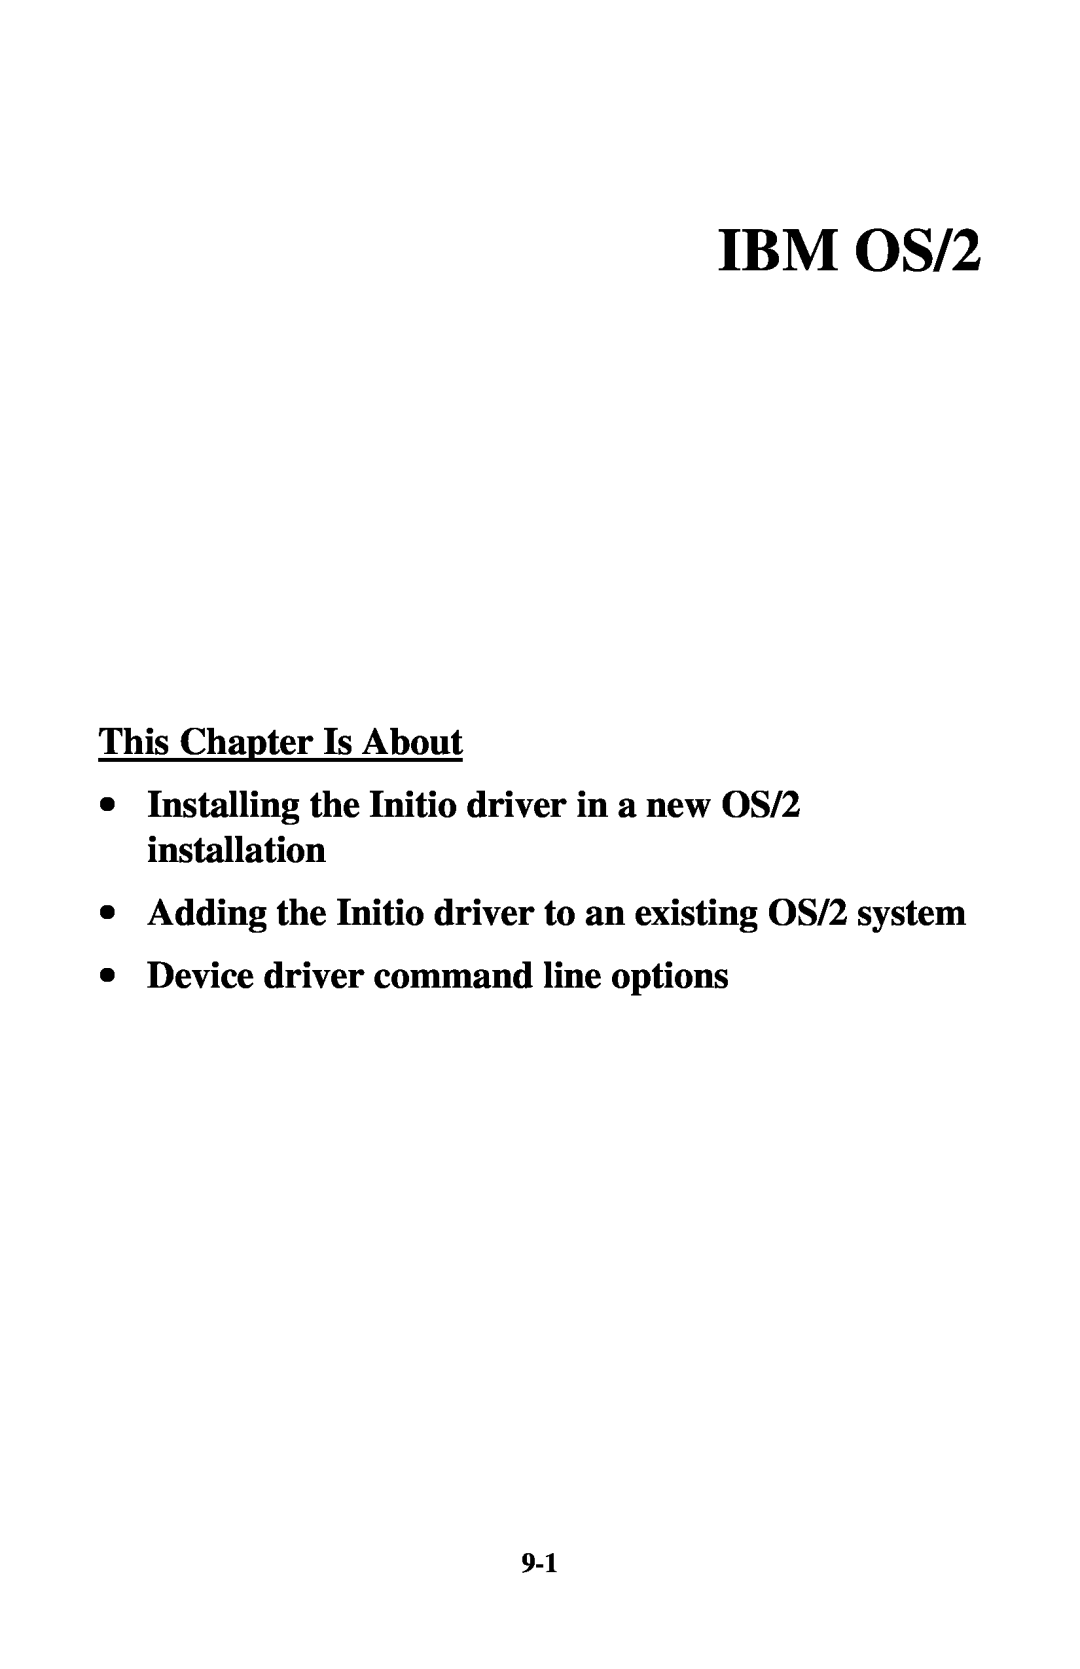 Initio INI-9100UW user manual IBM OS/2, ∙ Installing the Initio driver in a new OS/2 installation, This Chapter Is About 